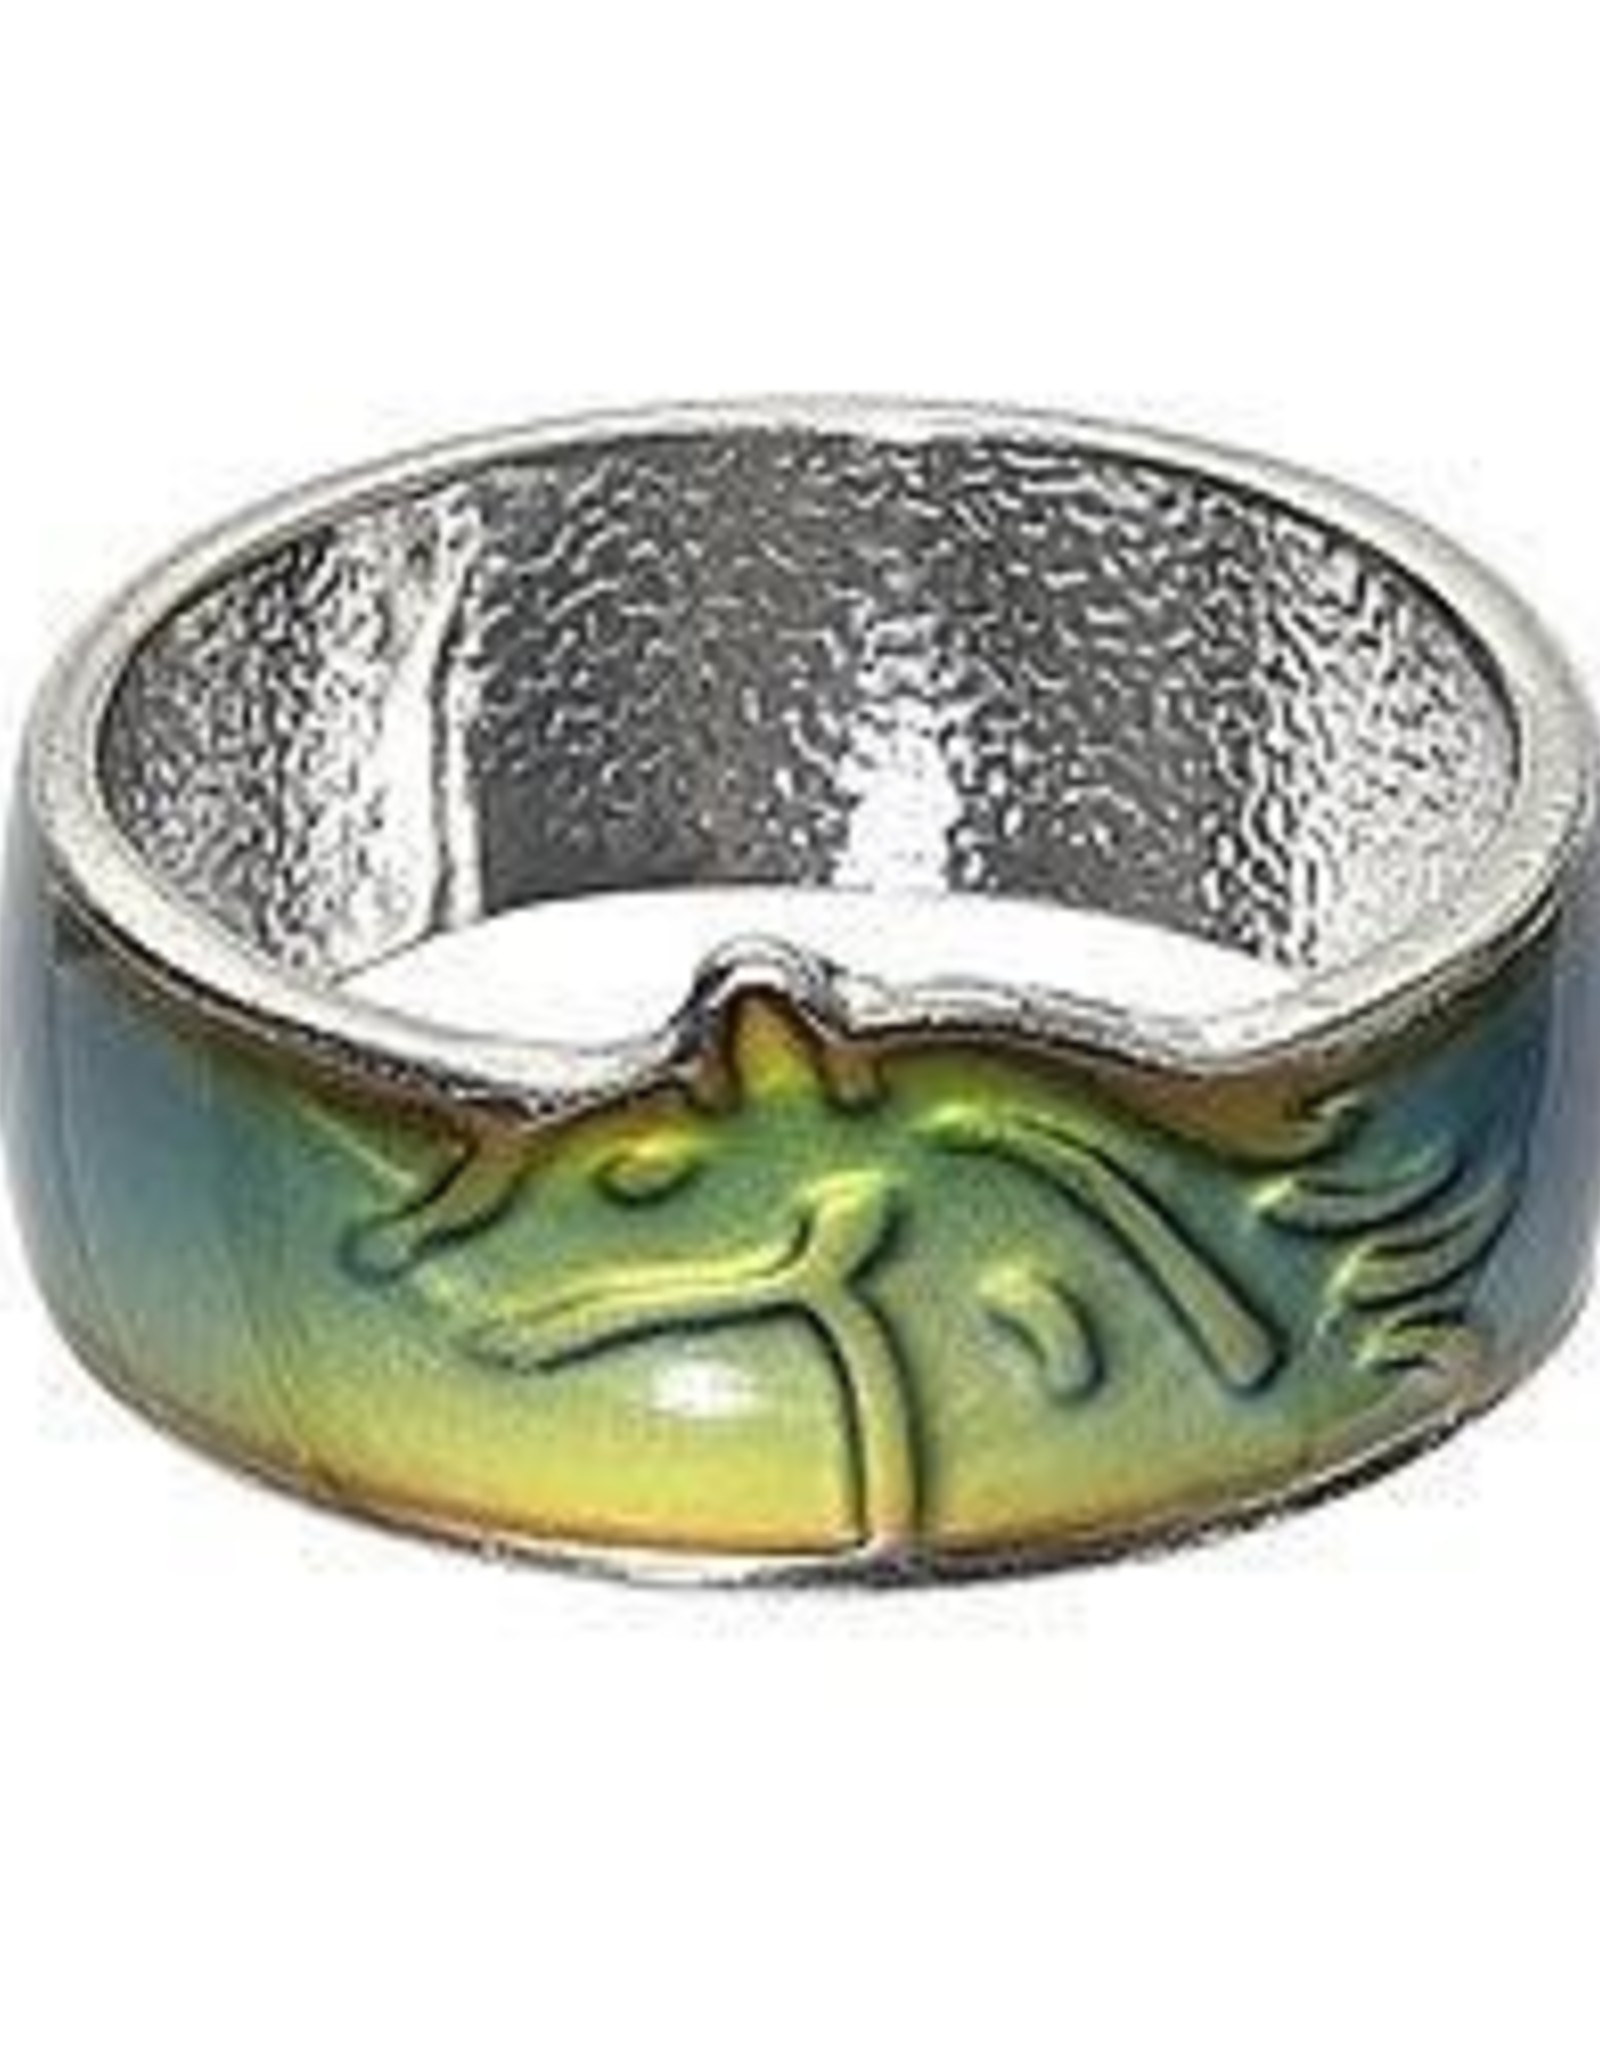 Pony Mood Rings - Assorted